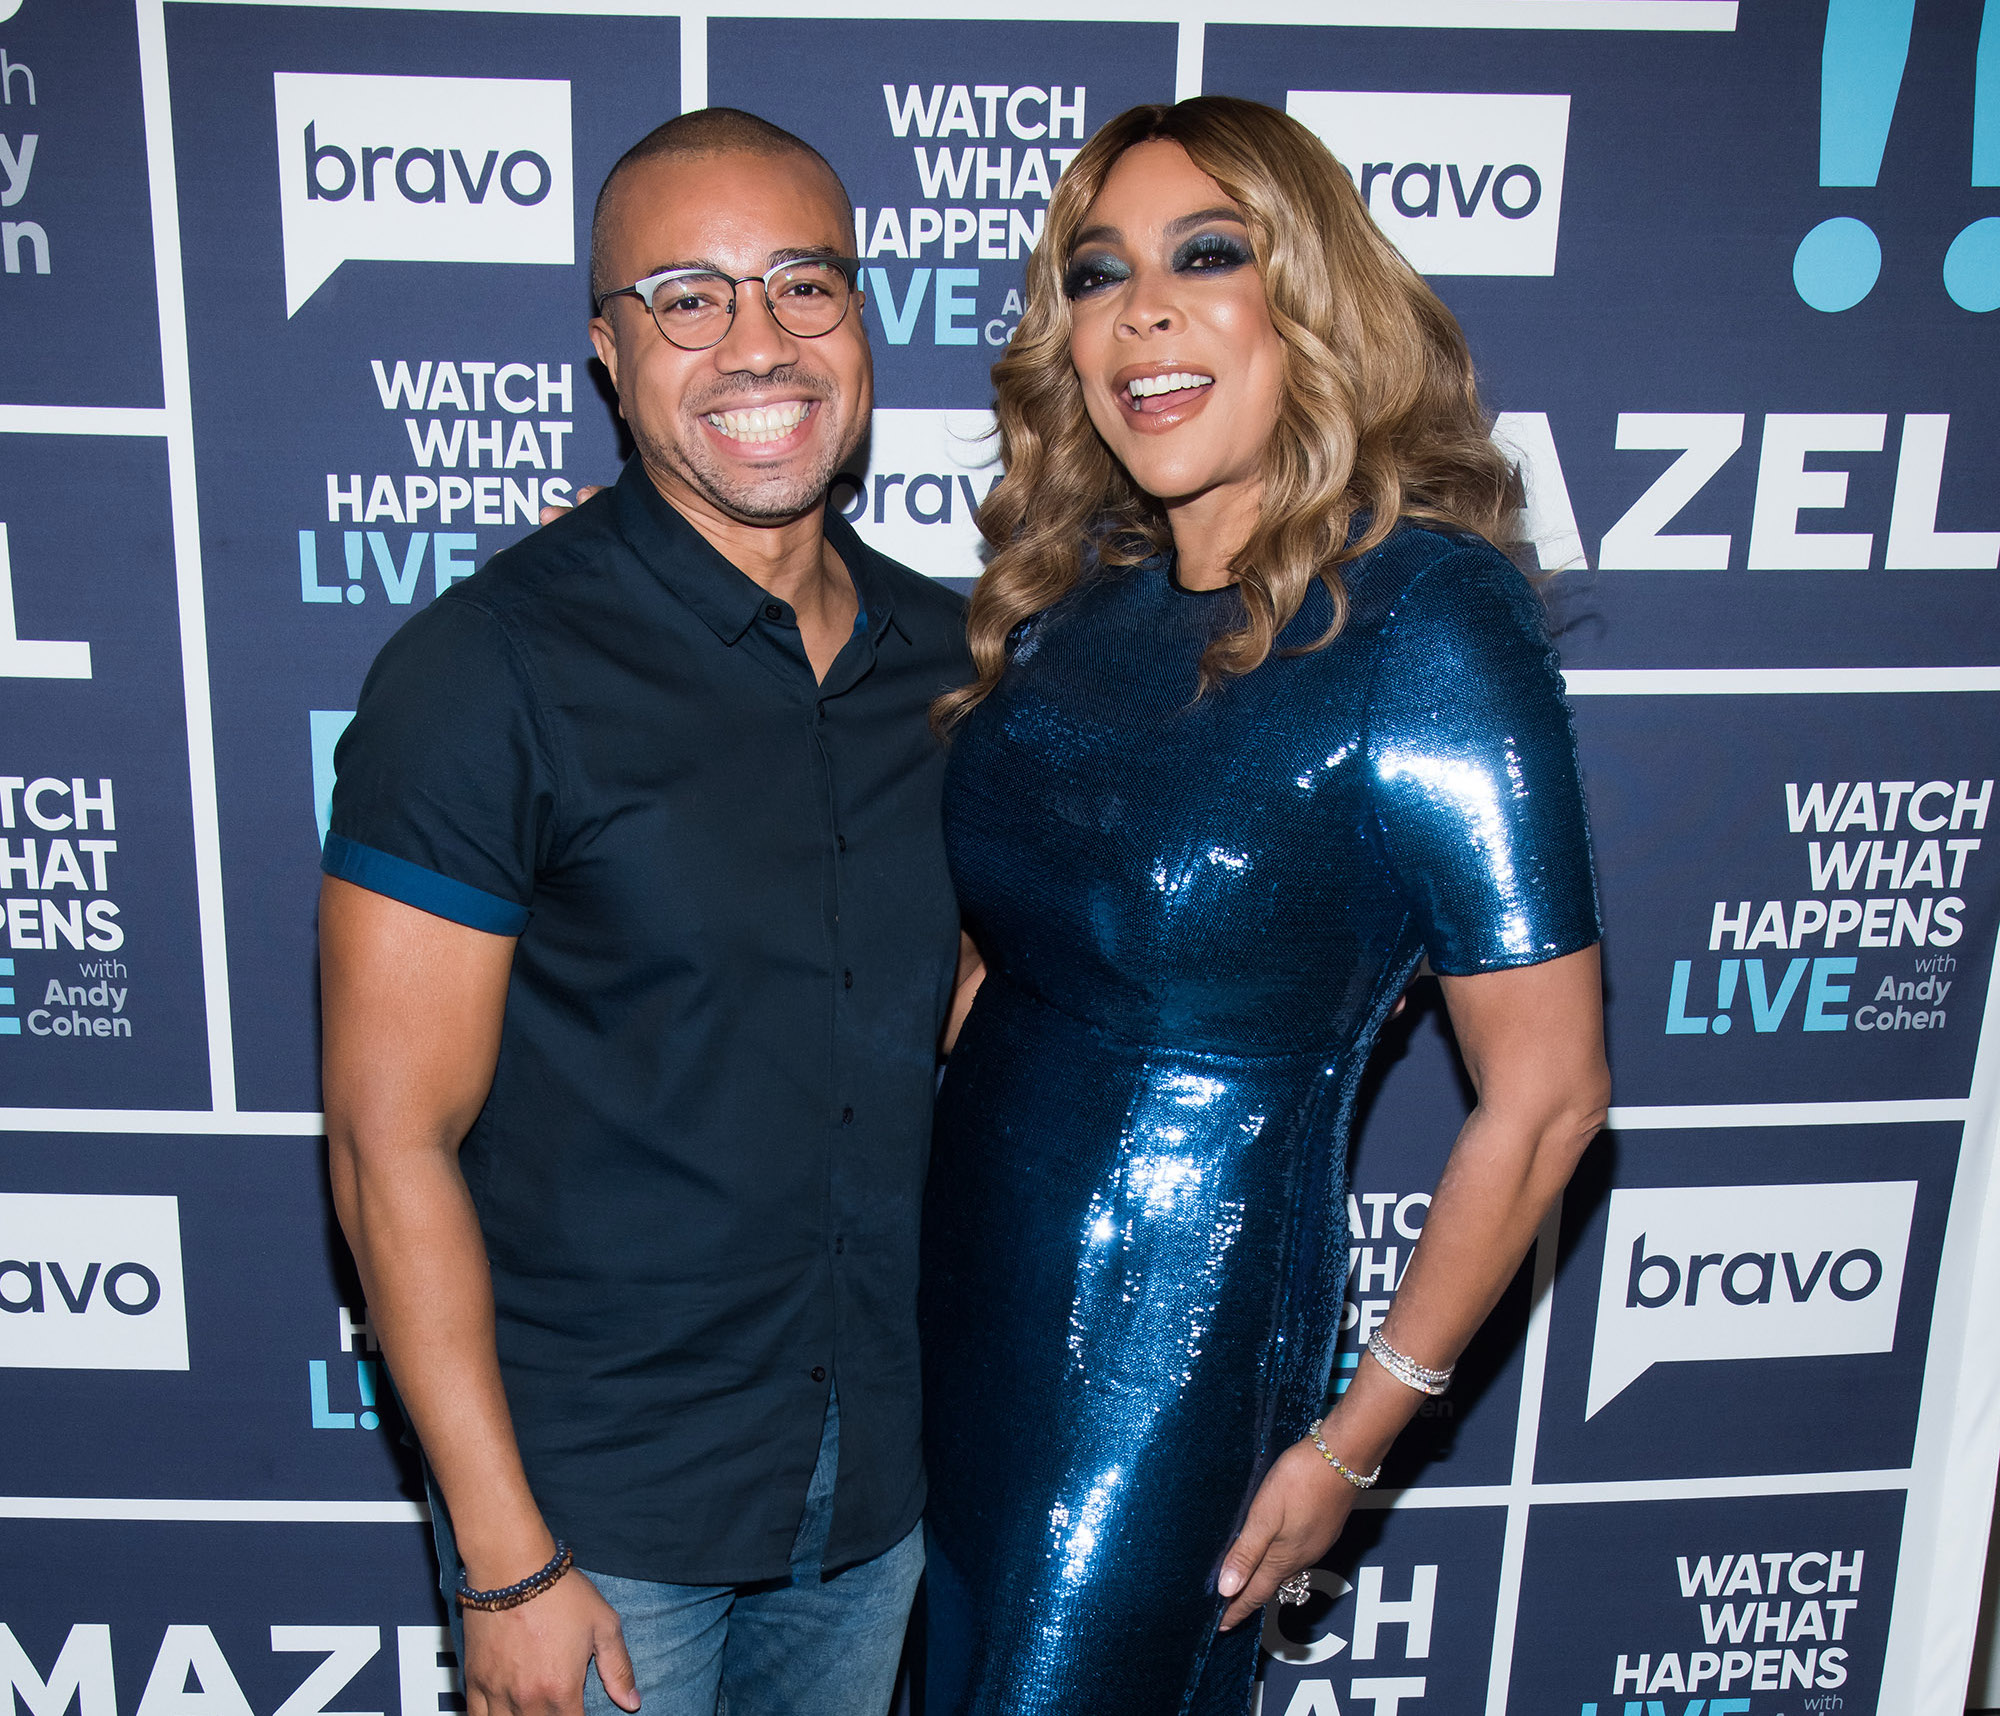 Norman Baker and Wendy Williams on 'Watch What Happens Live;' Baker says he's sad about the show ending and Williams isn't in good health